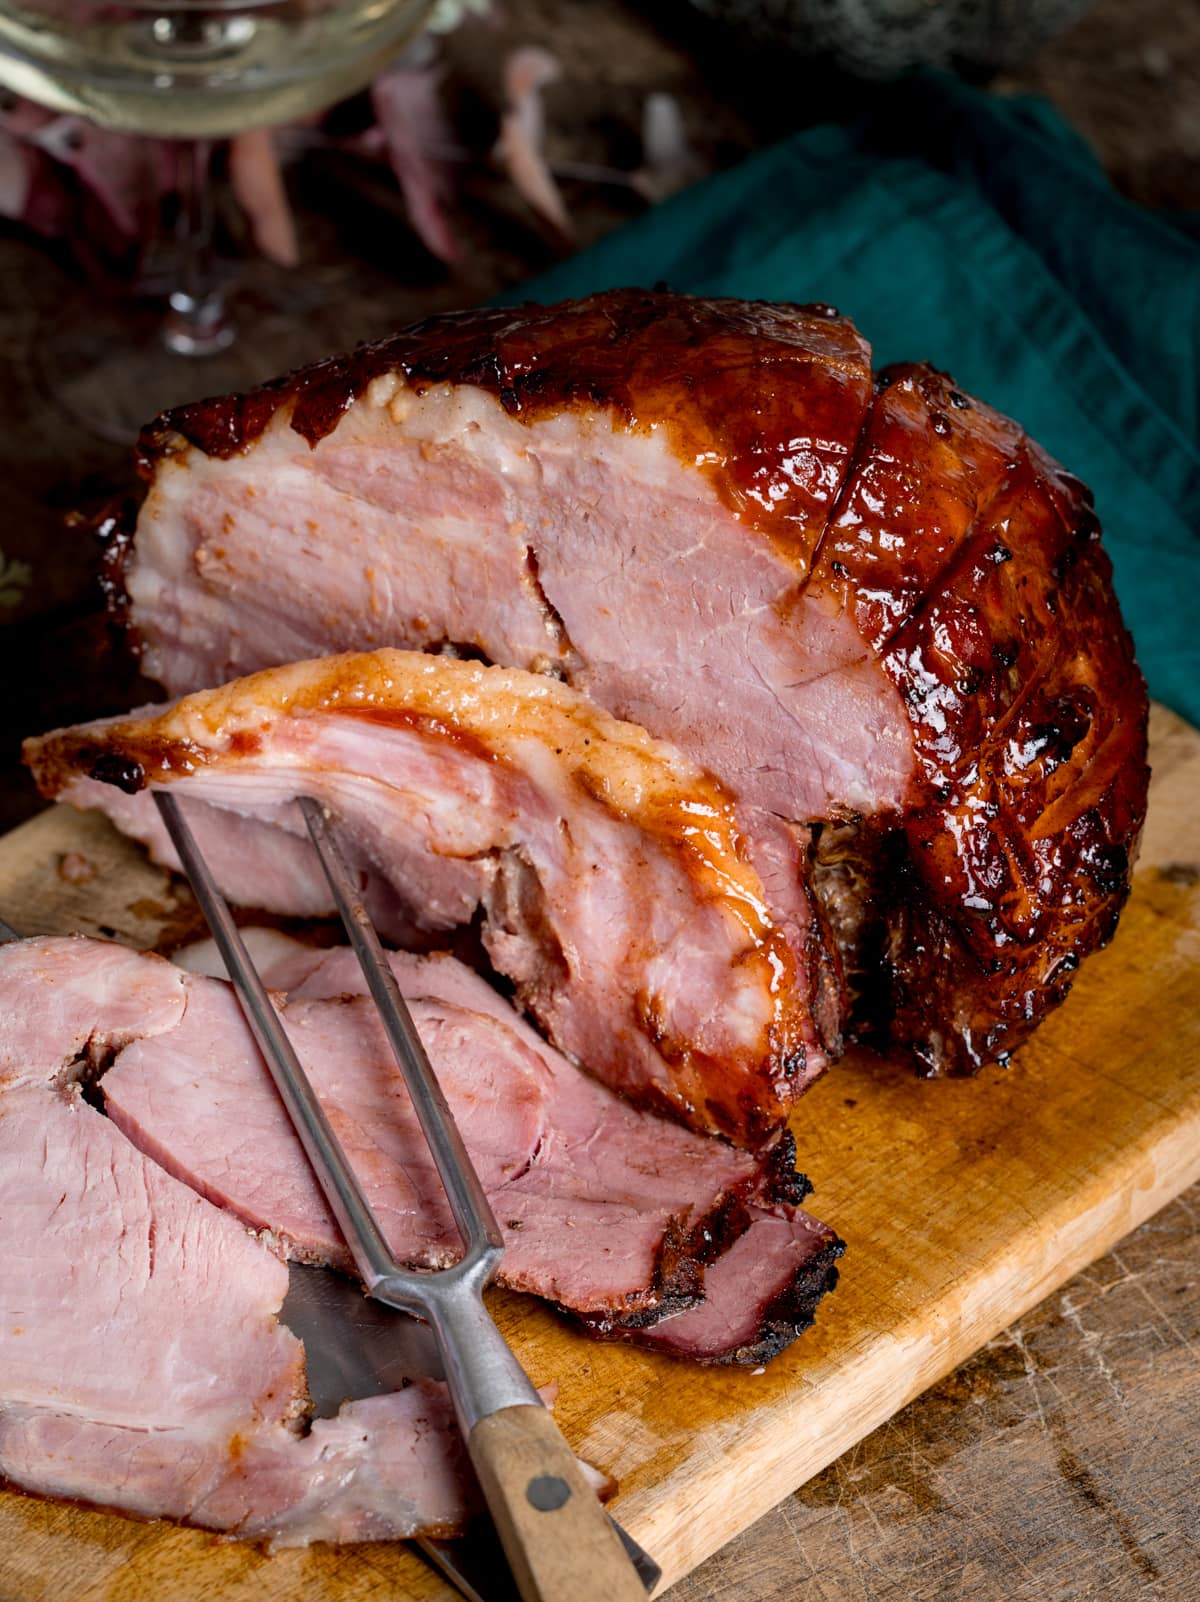 A slow cooker gammon joint with some slices sliced off and carving fork in the foreground.